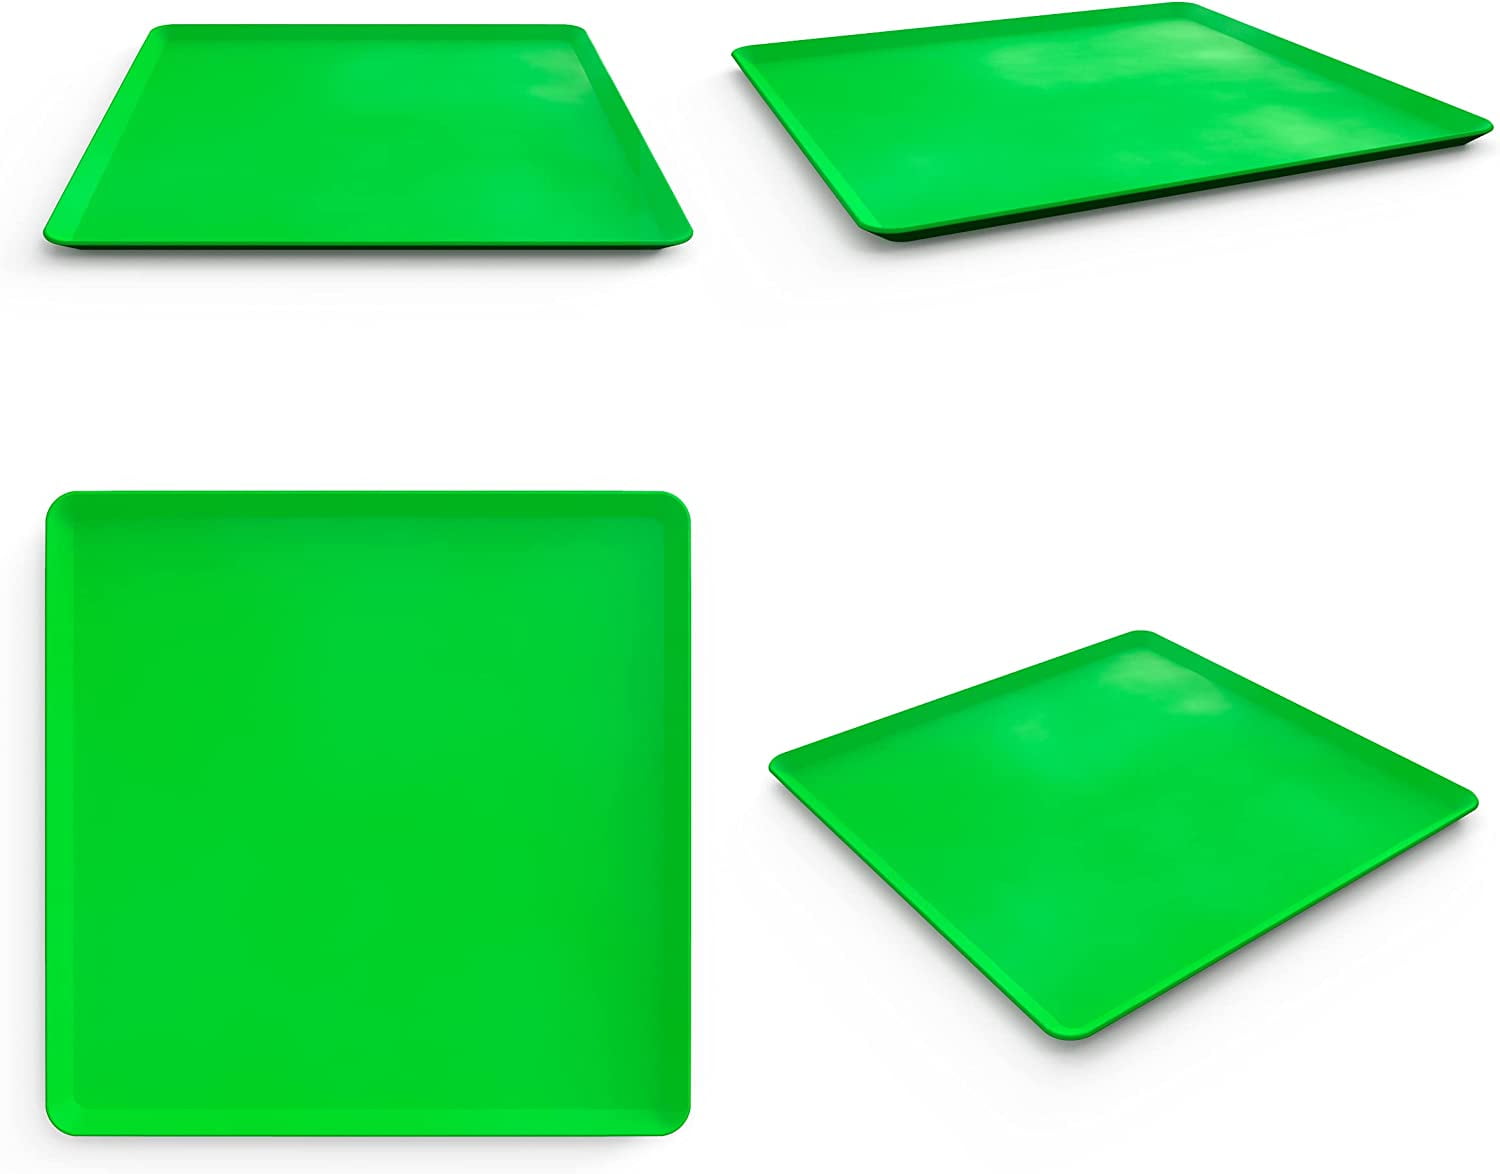 Skywin Dog Puppy Pad Holder Tray - Green, 2 Pack No Spill Pee Pad Holder for Dogs - Pee Pad Holder Works with Most Training Pads (Green)